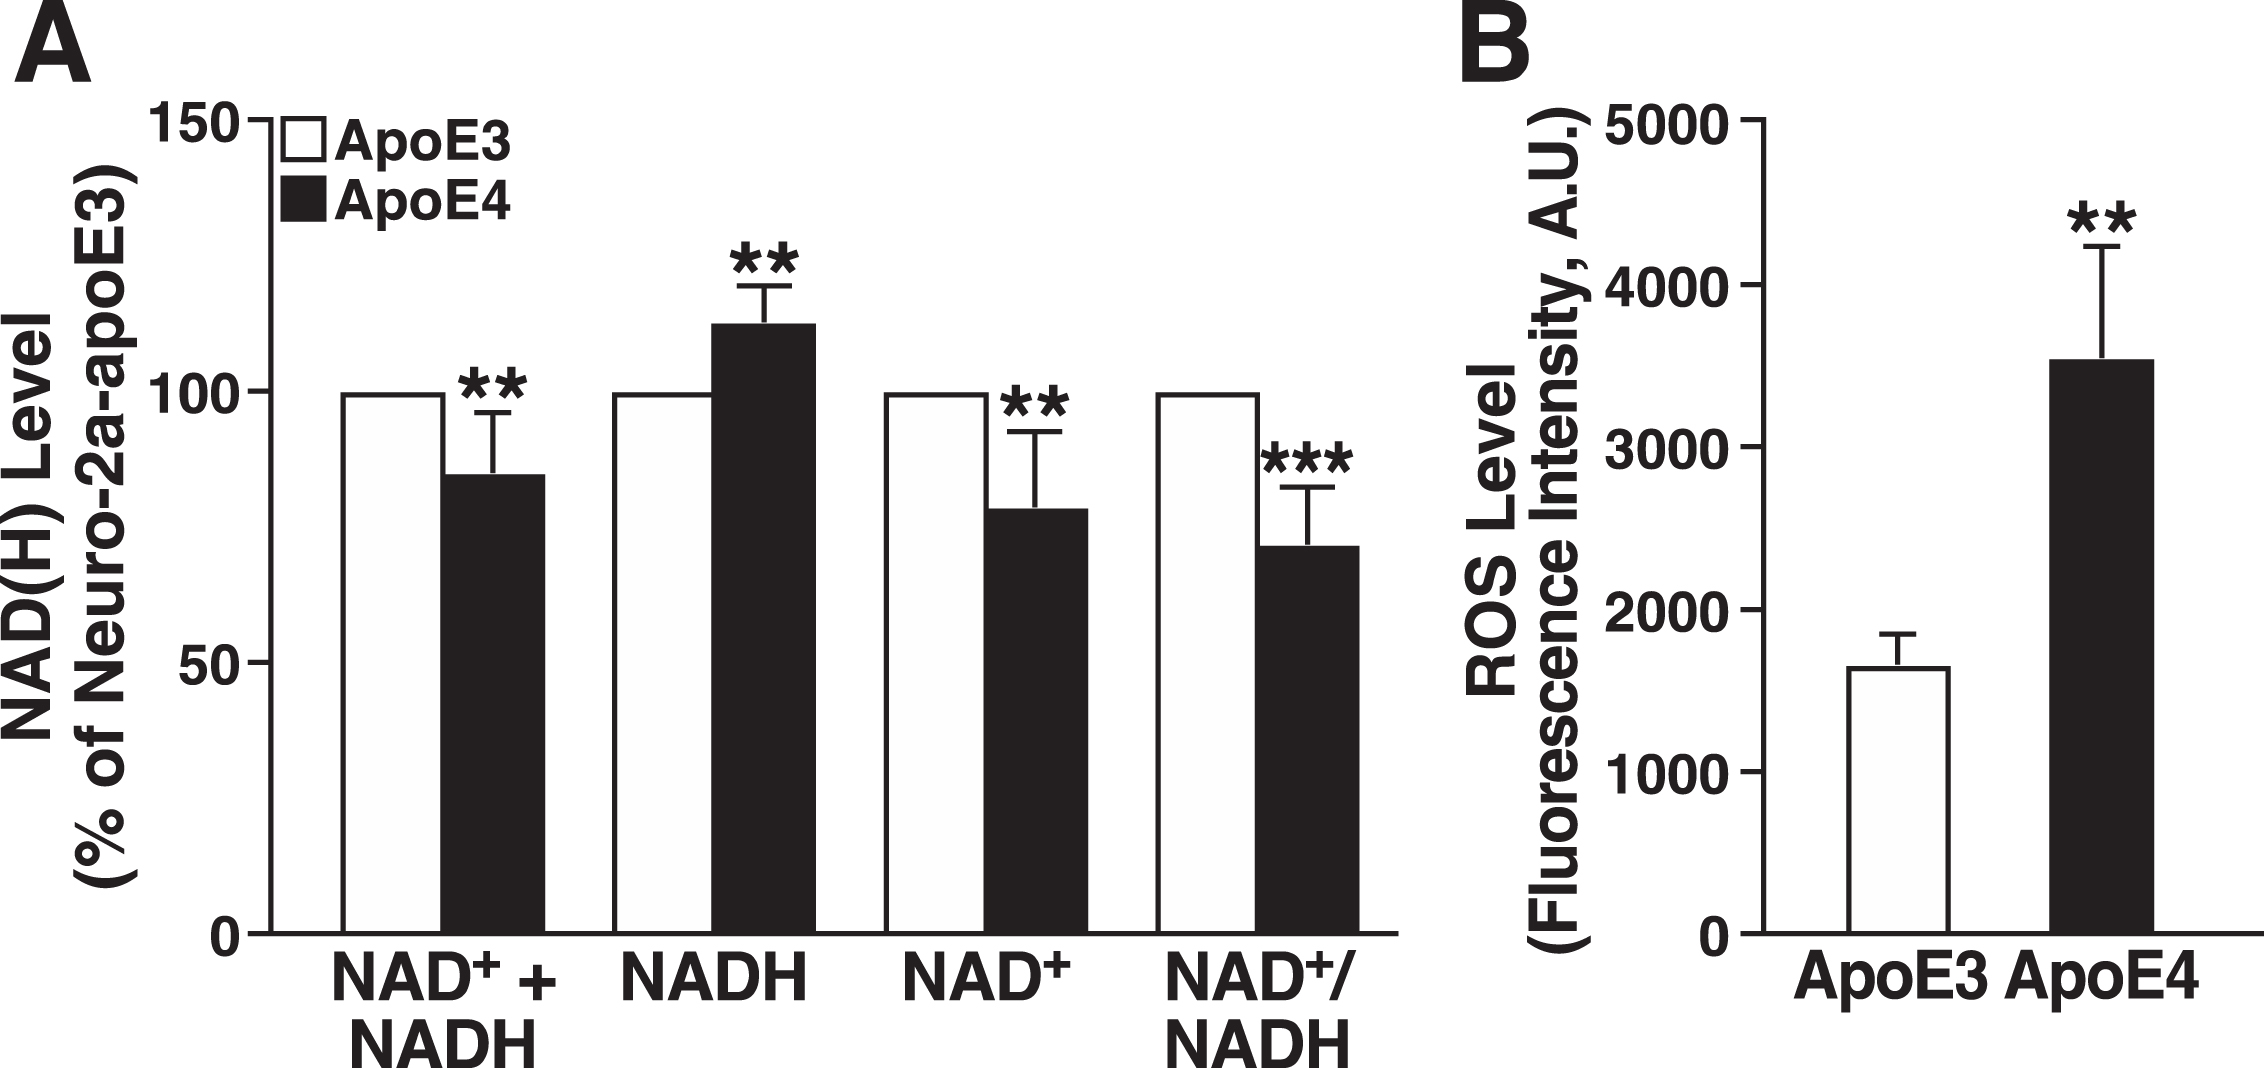 ApoE4 expression decreases the NAD+/NADH ratio and increases ROS production. A) Total levels of NAD+ + NADH, NADH, NAD+, and NAD+/NADH ratio in N2a-apoE4 cells under basal conditions relative to those in N2a-apoE3 cells (n = 5). One sample t test with theoretical mean at 100% (no change from level in N2a-apoE3 cells). B) Intracellular ROS levels in N2a-apoE3 and N2a-apoE4 cells stained with CellROX Orange (n = 3). Values are mean±SD. **p < 0.01, ***p < 0.001 versus N2a-apoE3 under same condition (t test). A.U., arbitrary units.